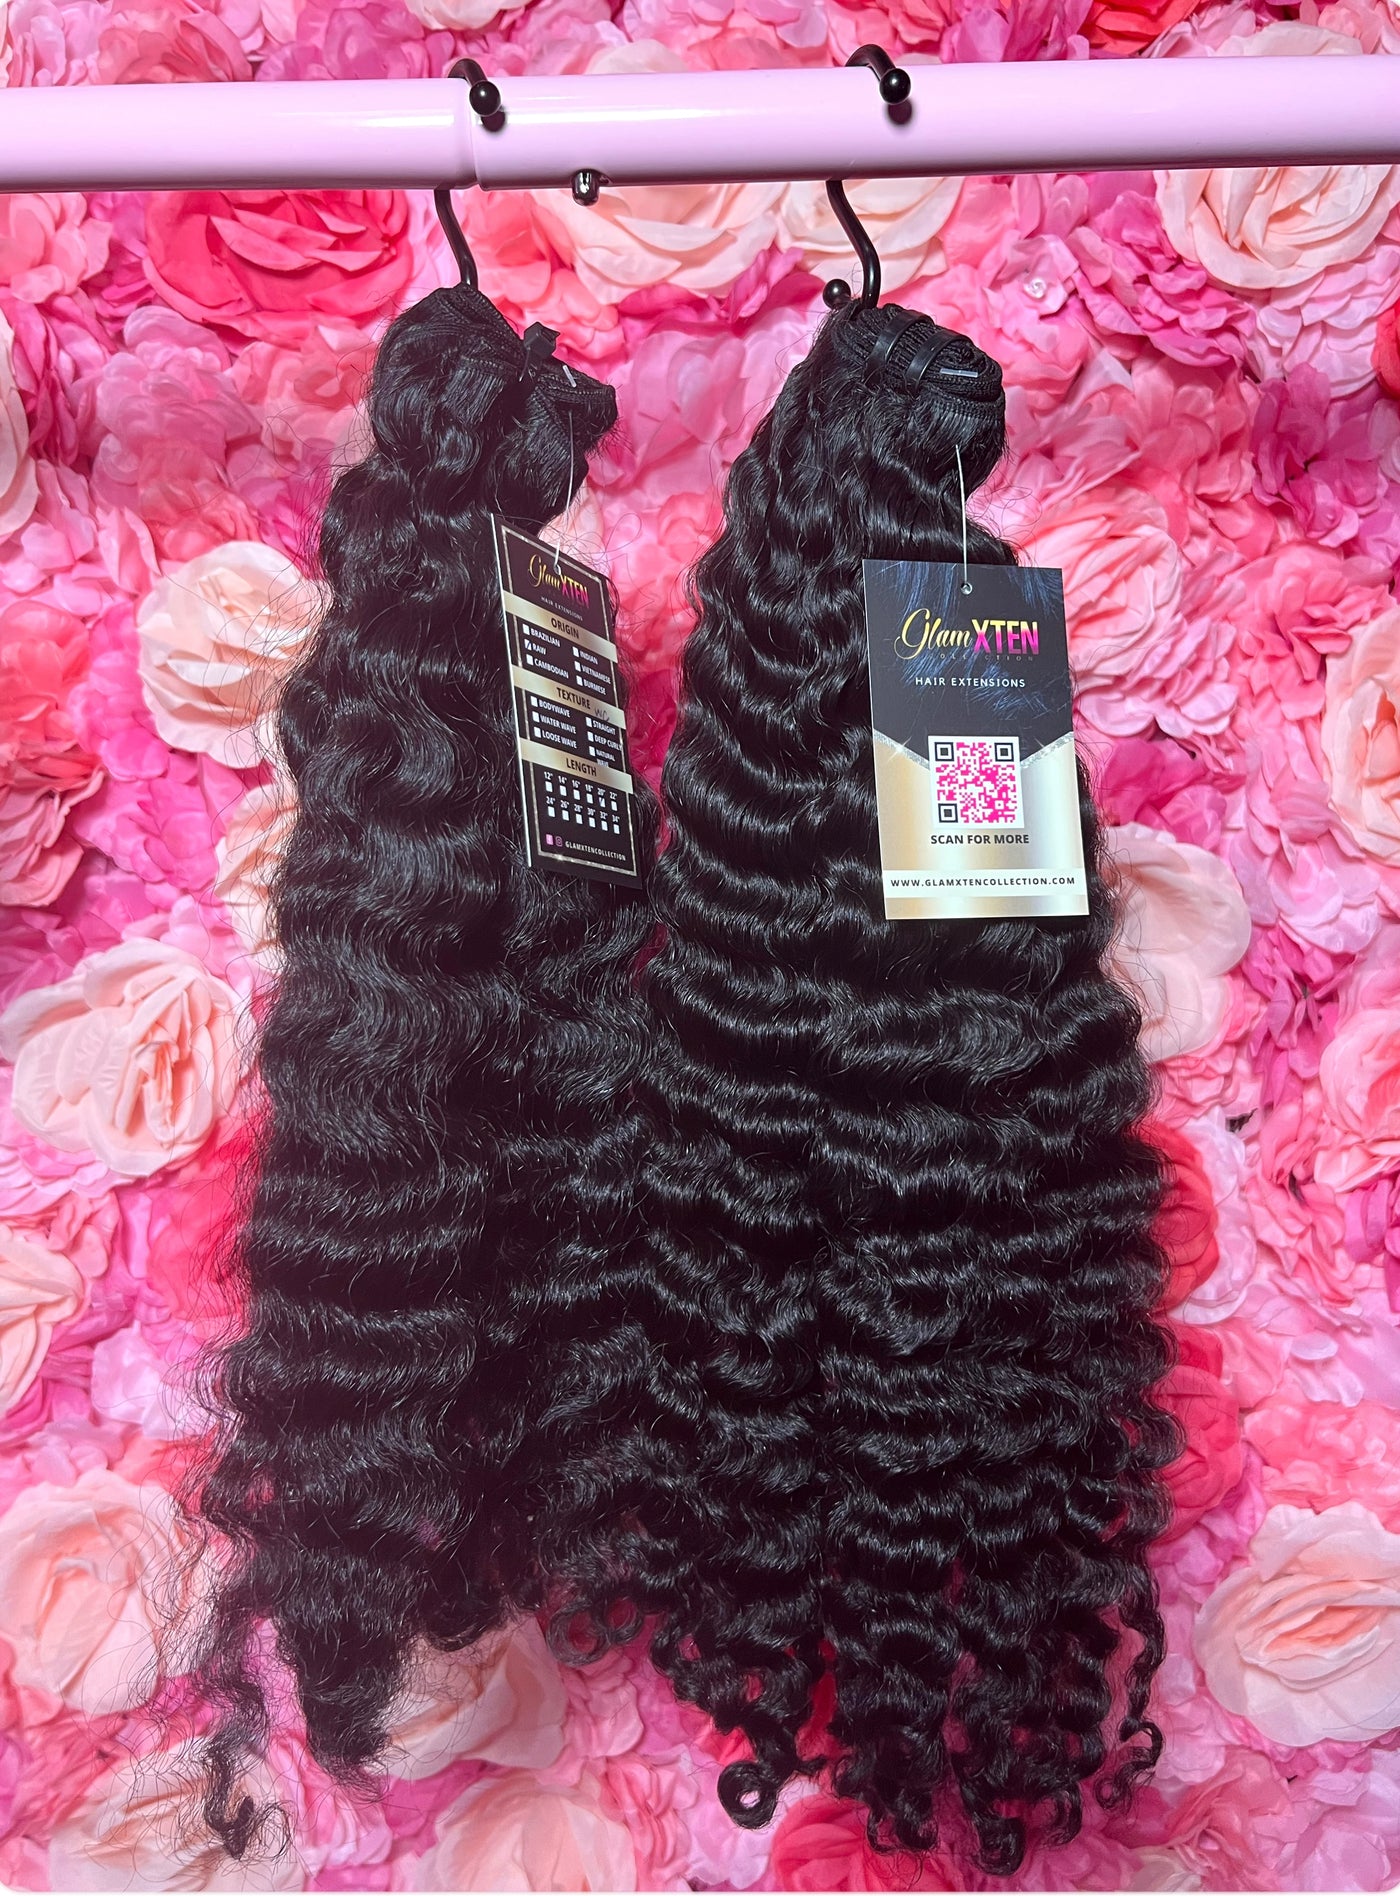 Raw Curly Wavy Bundles - Glam Xten Collection